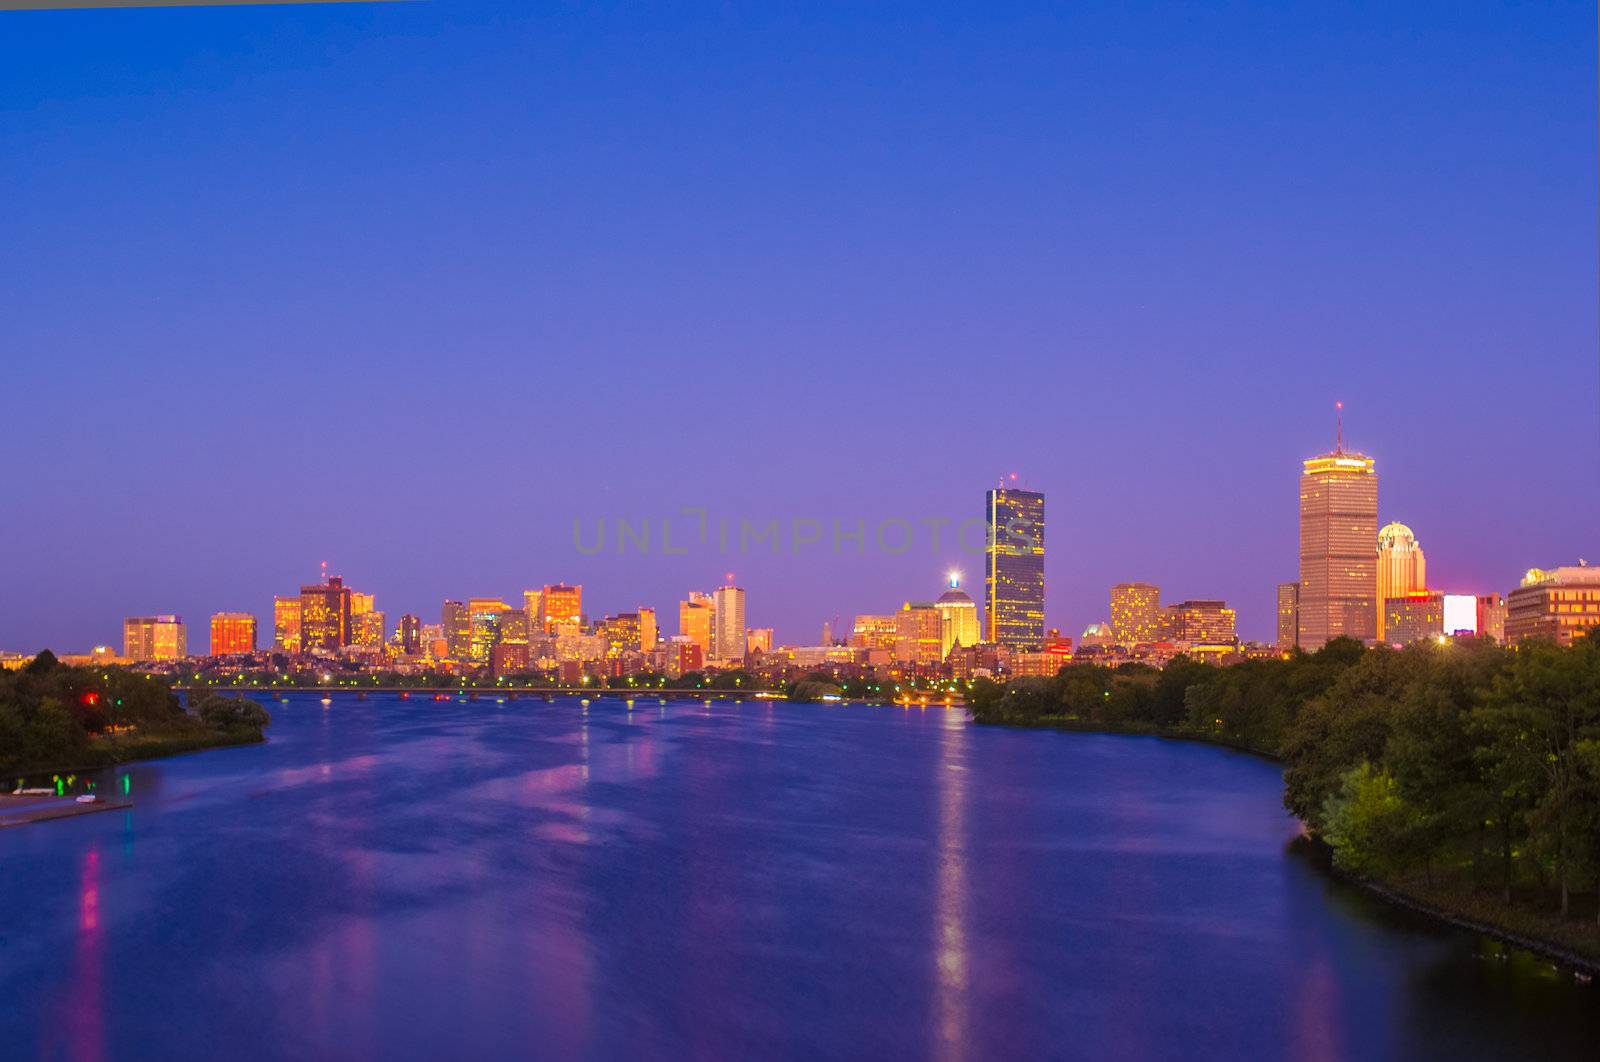 View of Boston, Cambridge, and the Charles River by edan